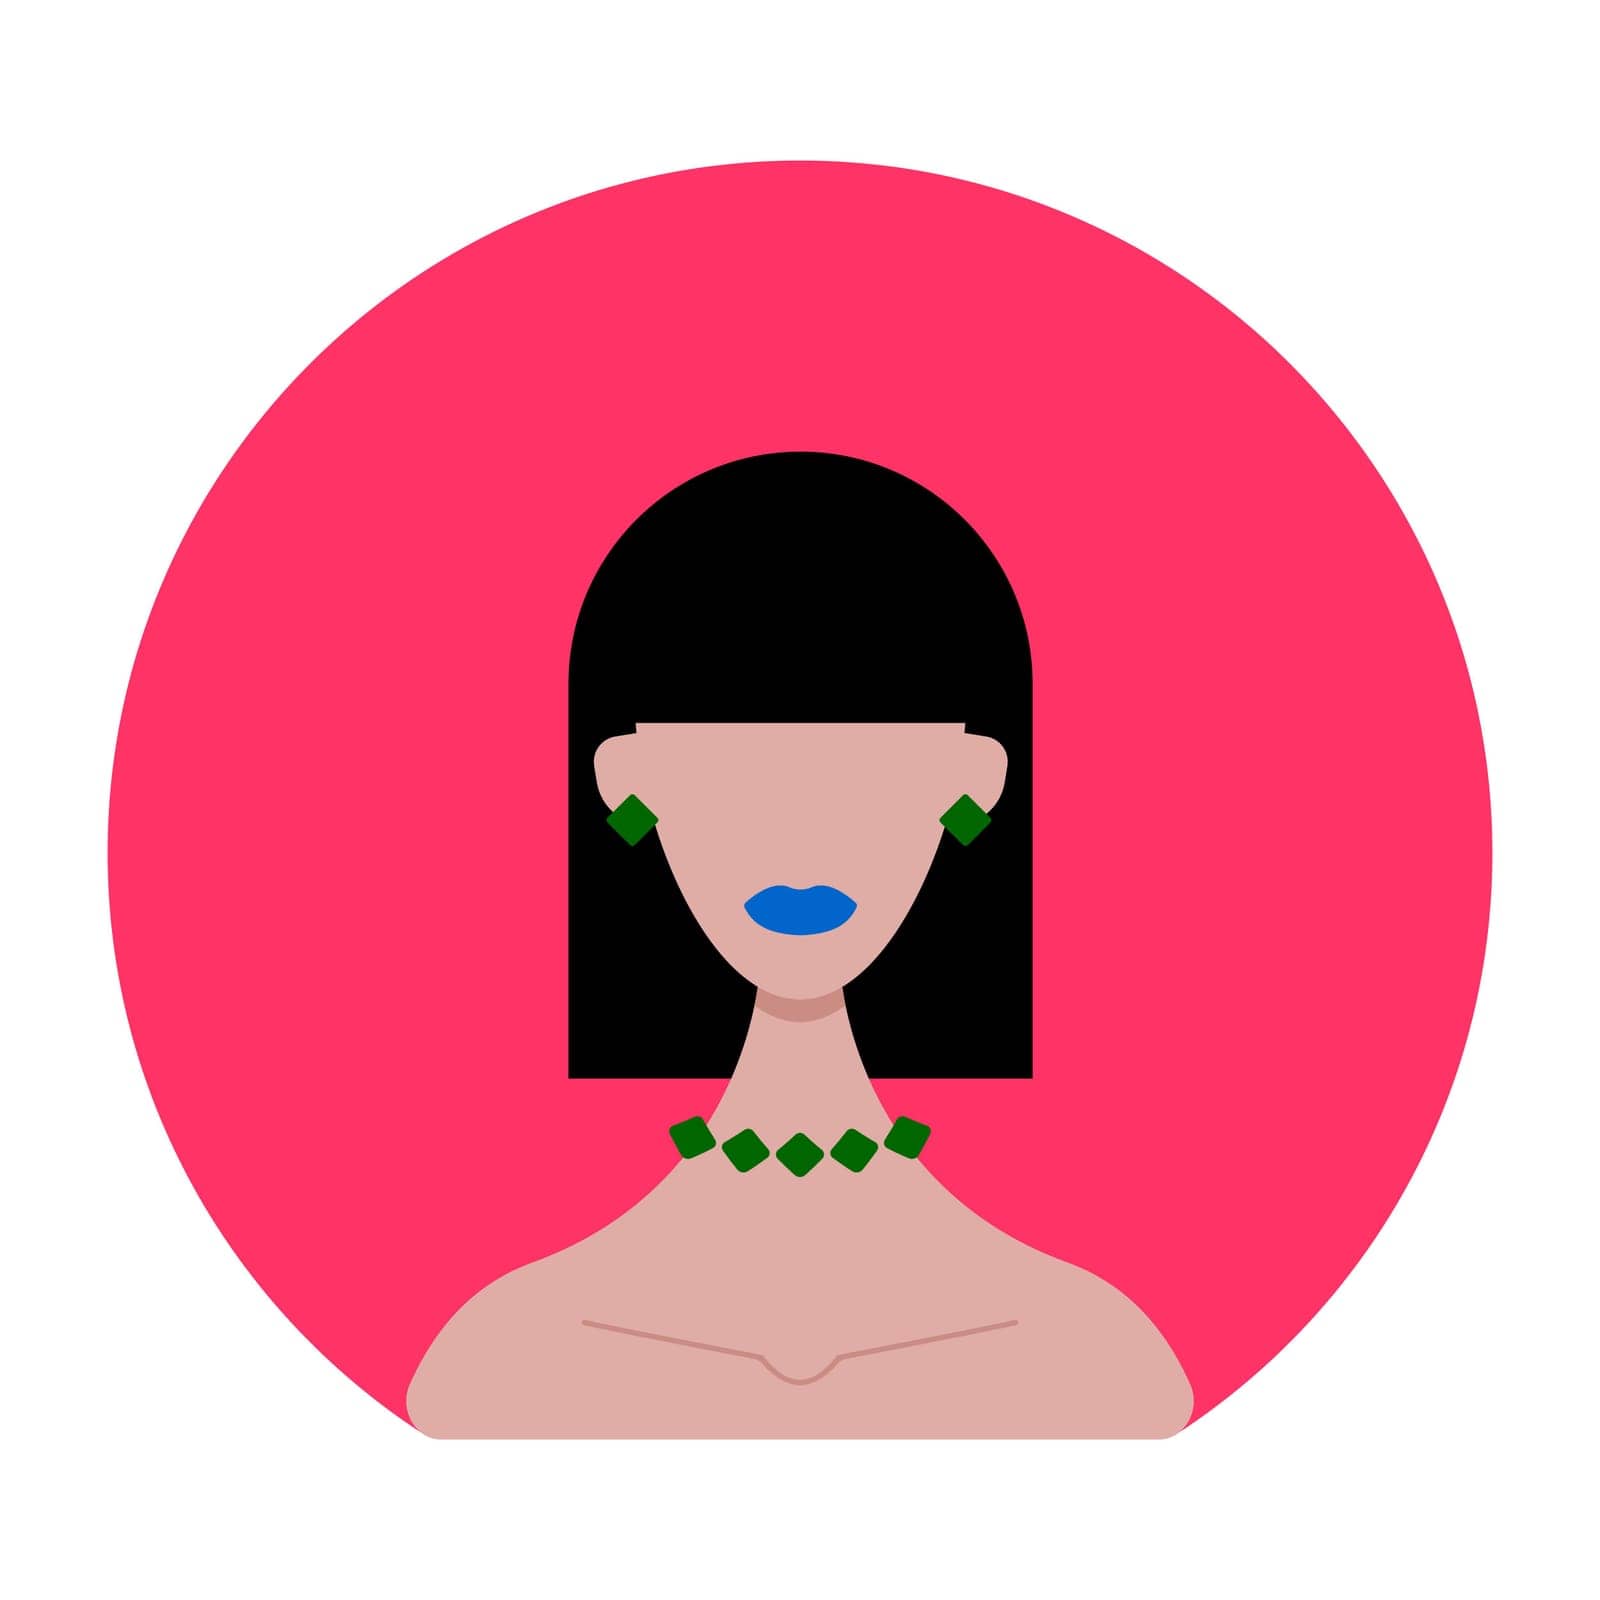 Icon of a black-haired woman with a short haircut with emerald jewelry on a blue oval background. by MeinLieben